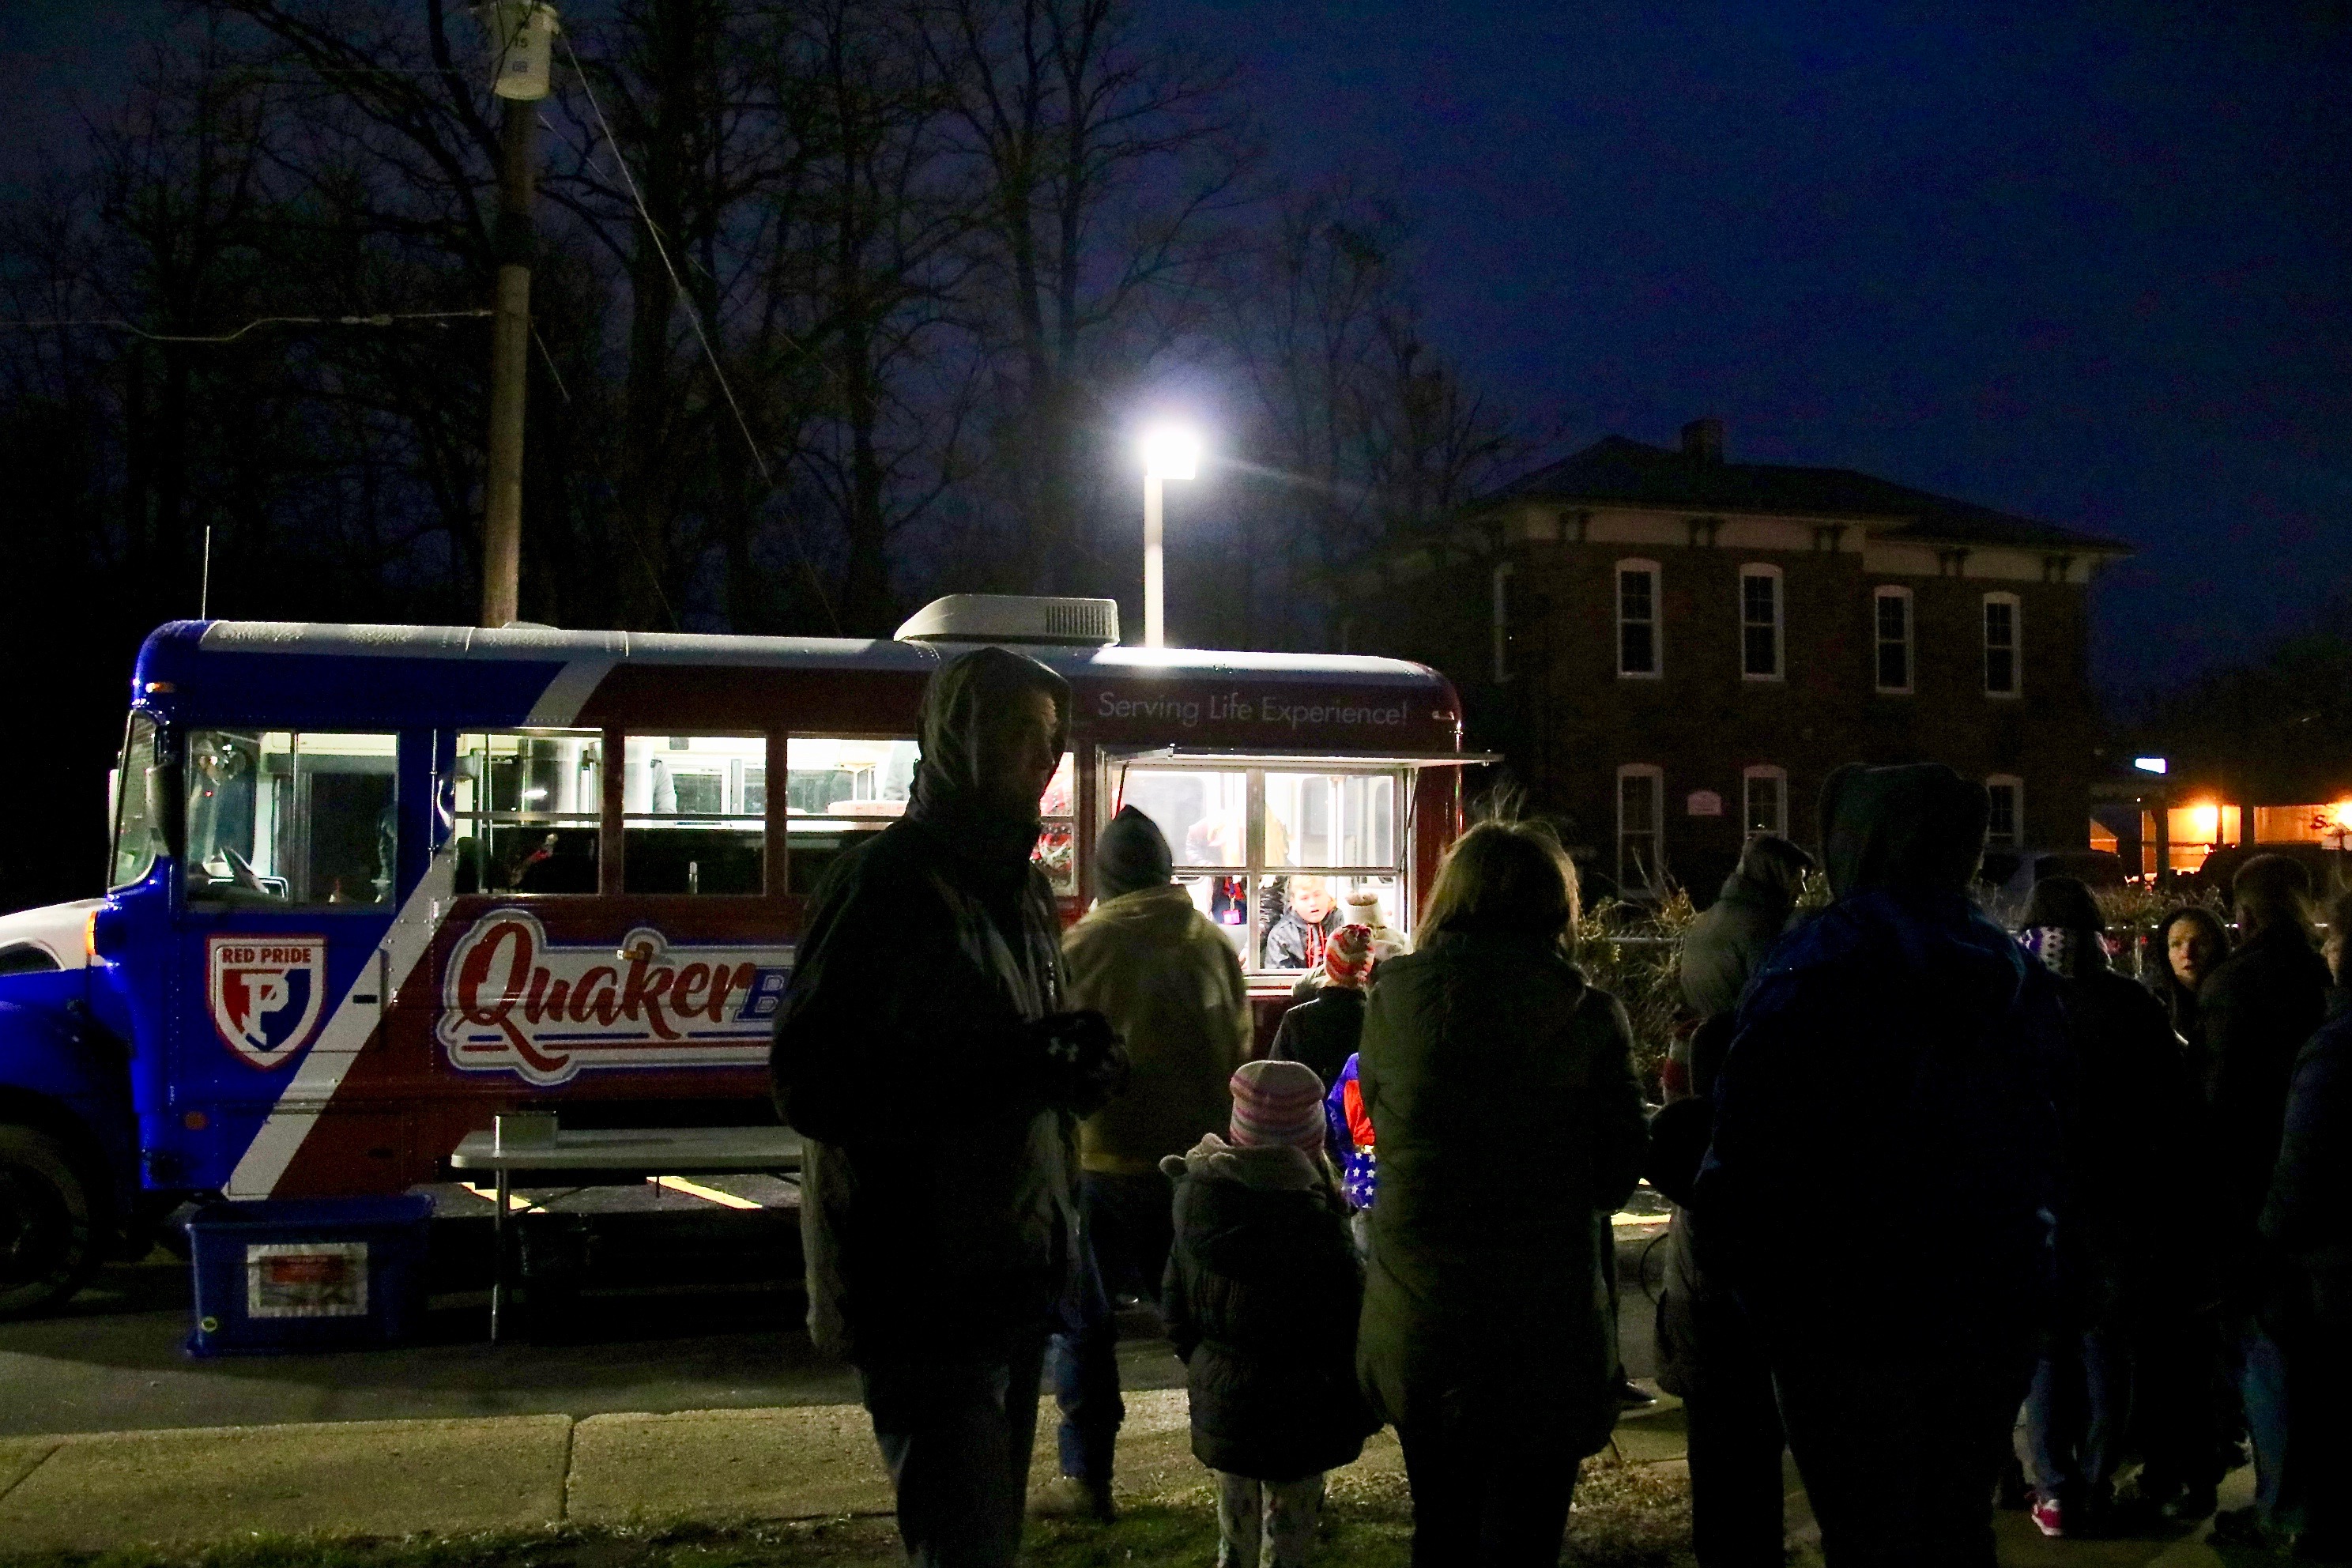 photo of people standing in line at a food truck